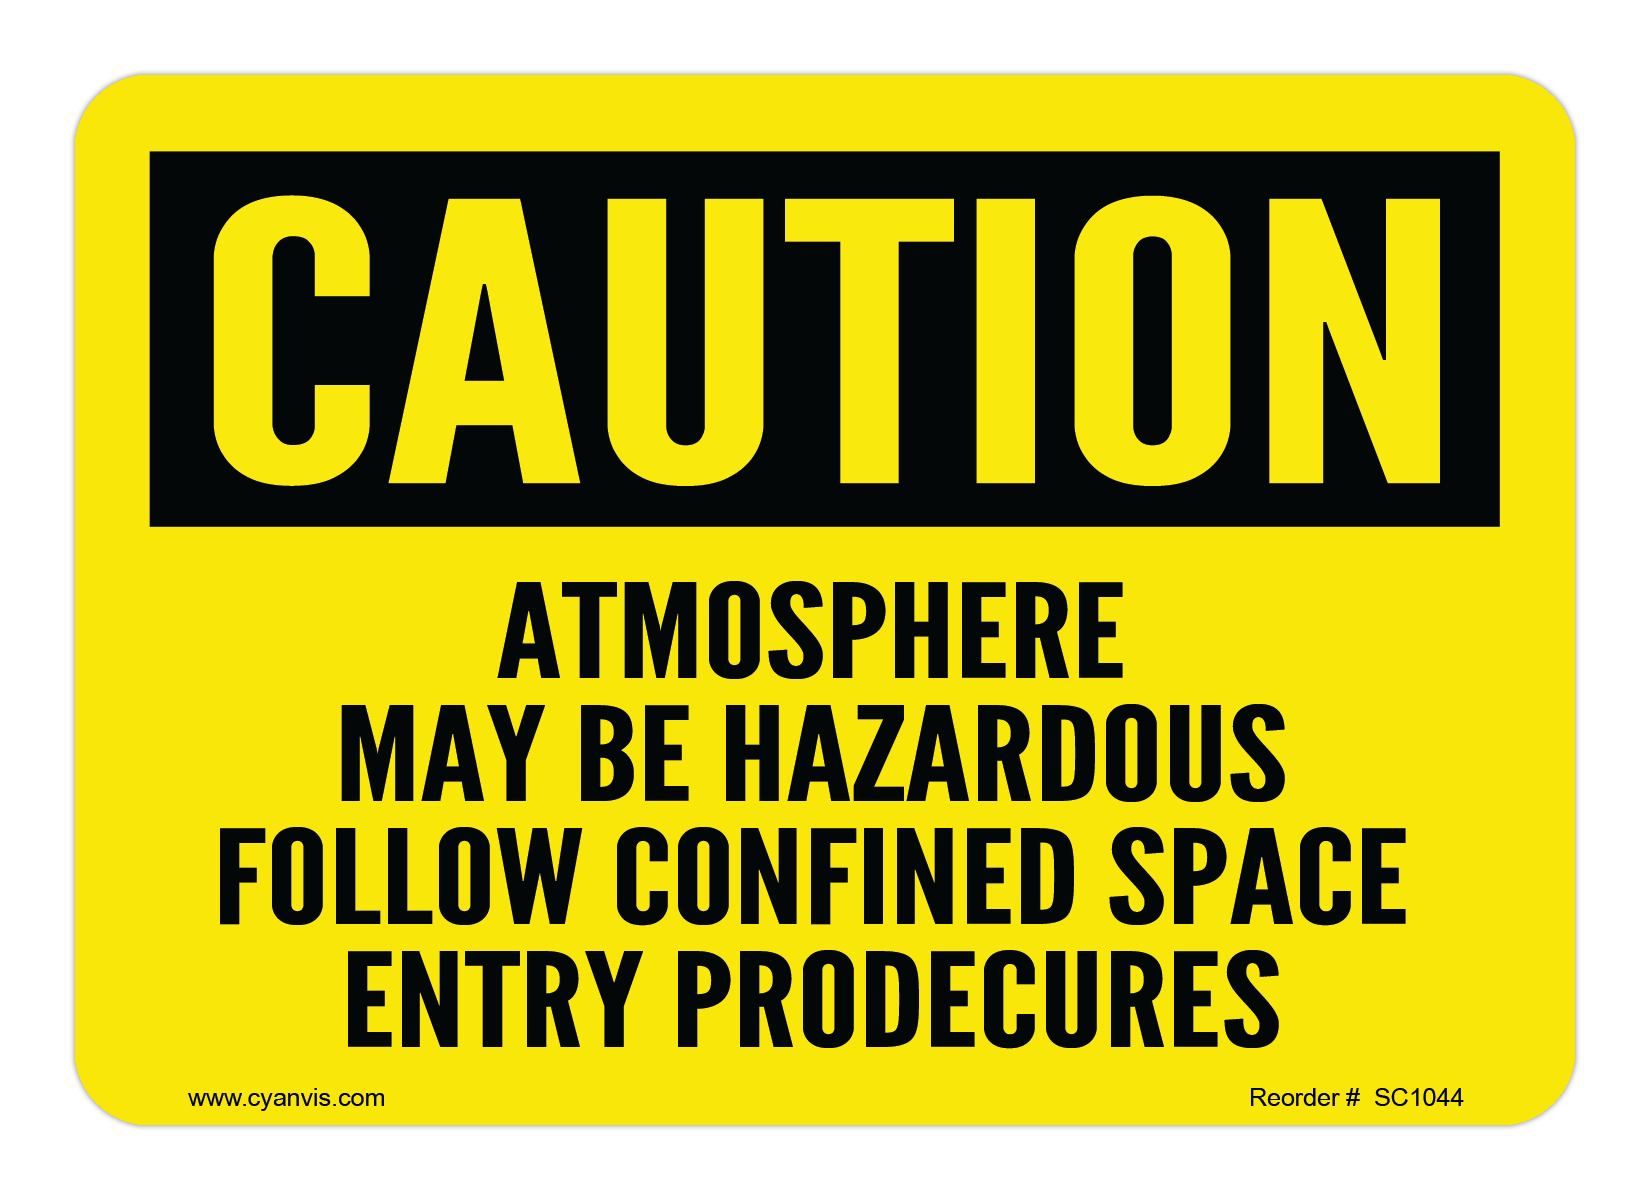 Safety Sign: Caution - ATMOSPHERE MAY BE HAZARDOUS FOLLOW CONFINED SPACE ENTRY PROCEDURES - CYANvisuals